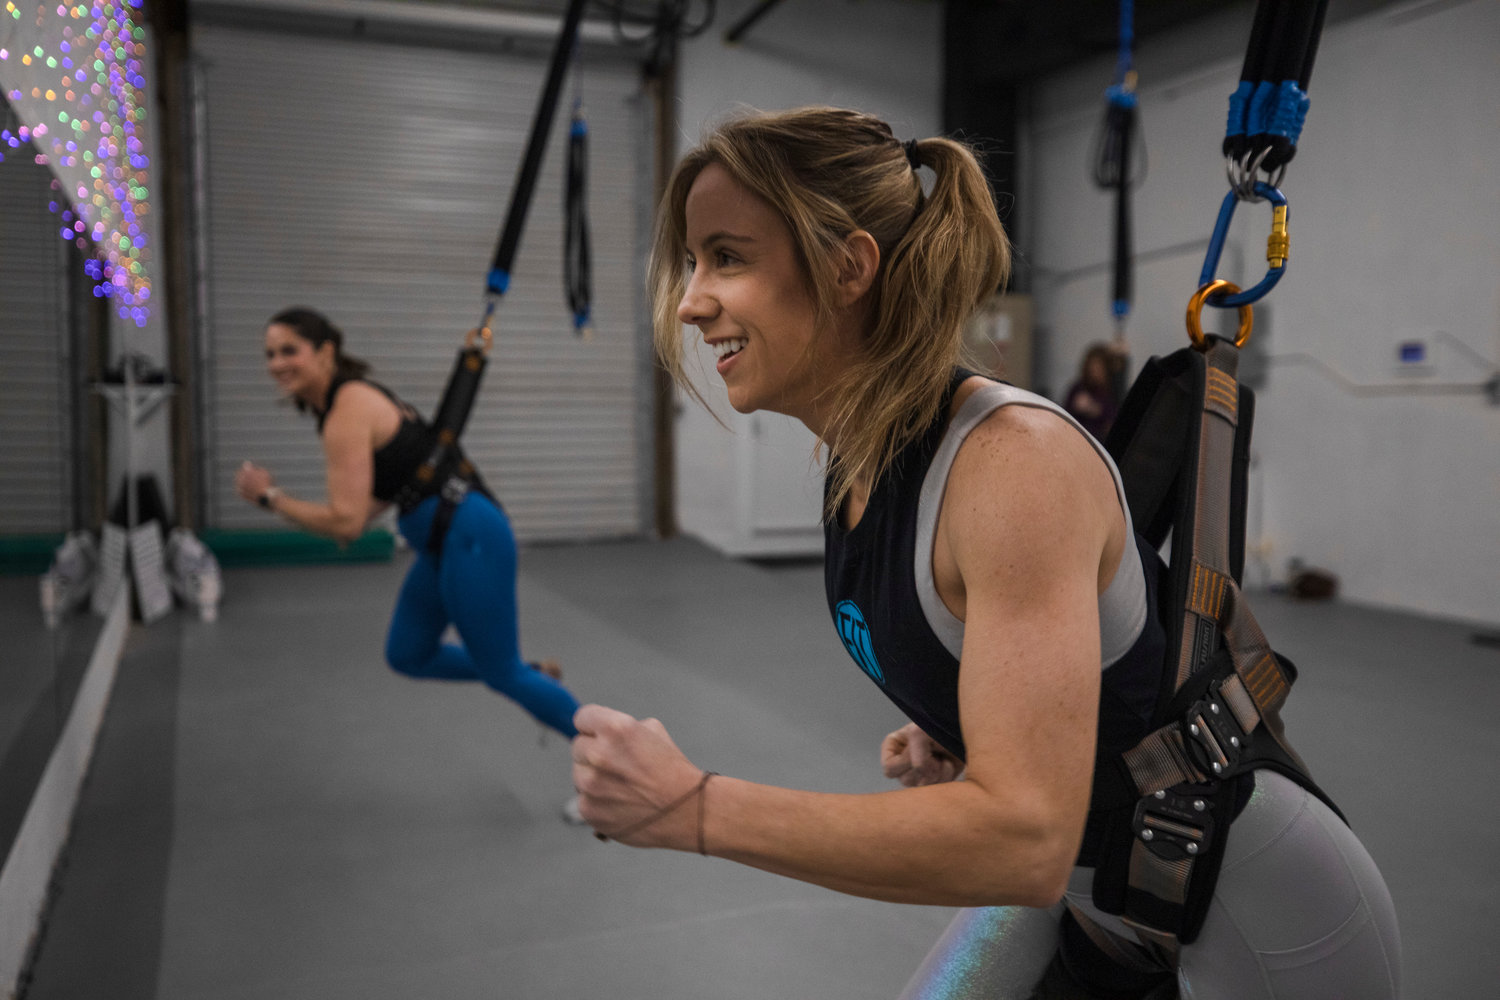 Jessica Watkins, owner of FIT Fairhope, leads Lauren Babcock in a Sling Bungee workout.